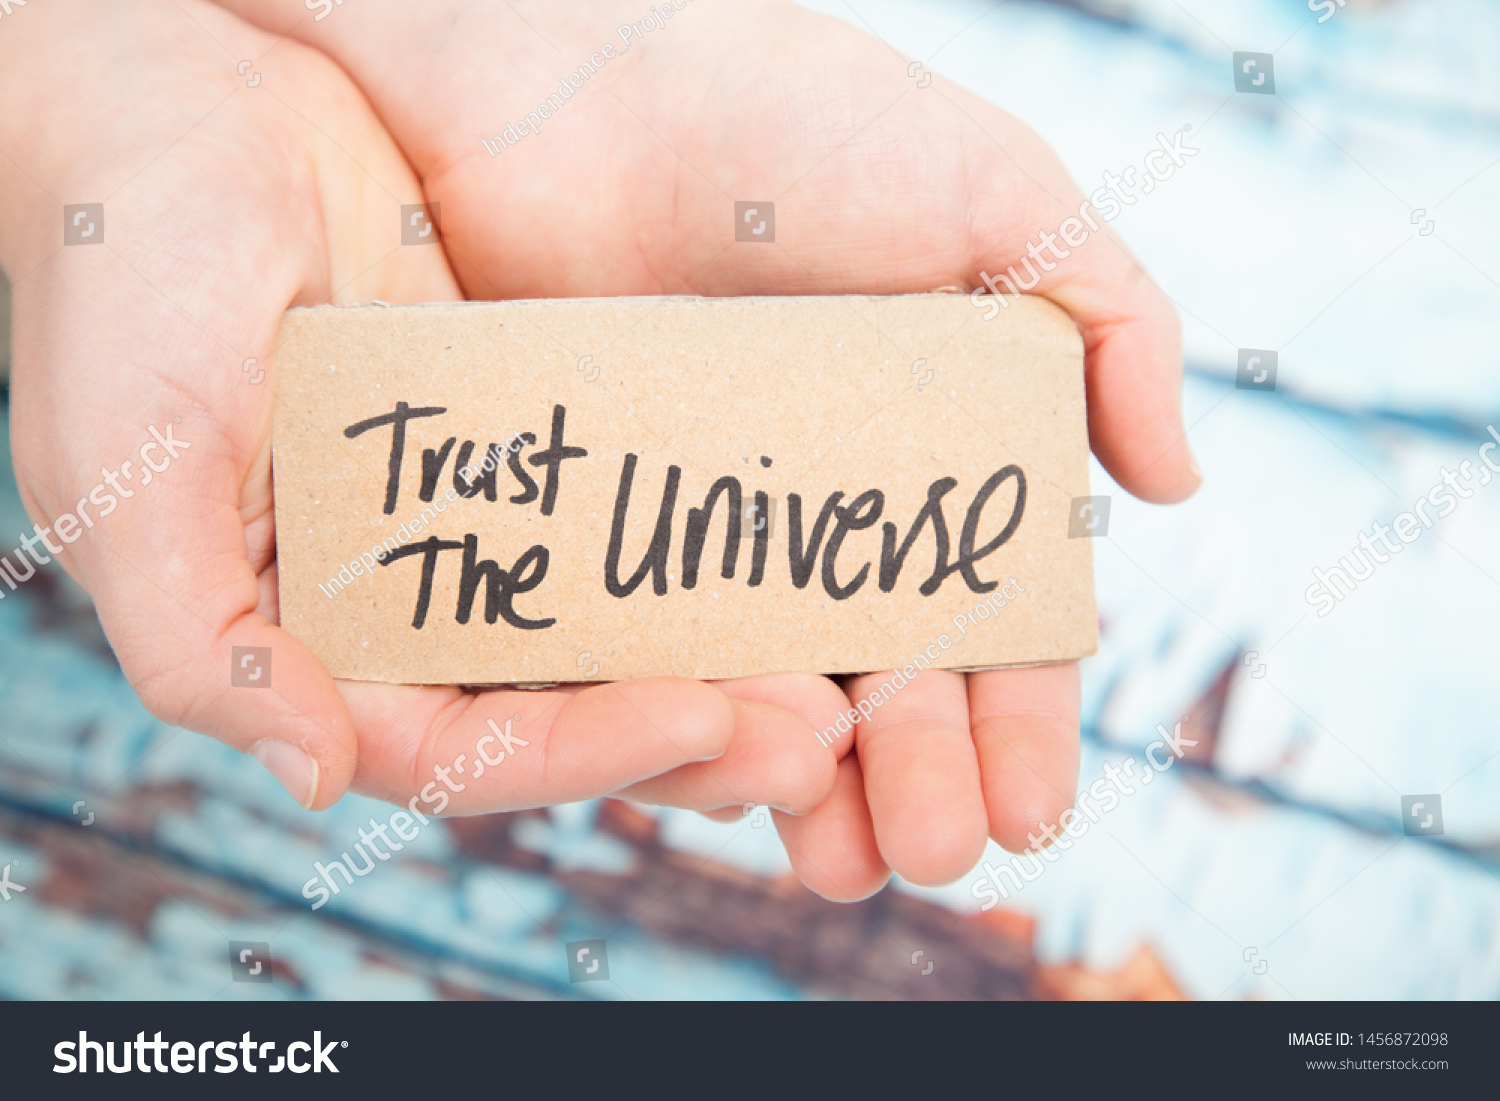 Trust the universe, law of attraction concept  #1456872098